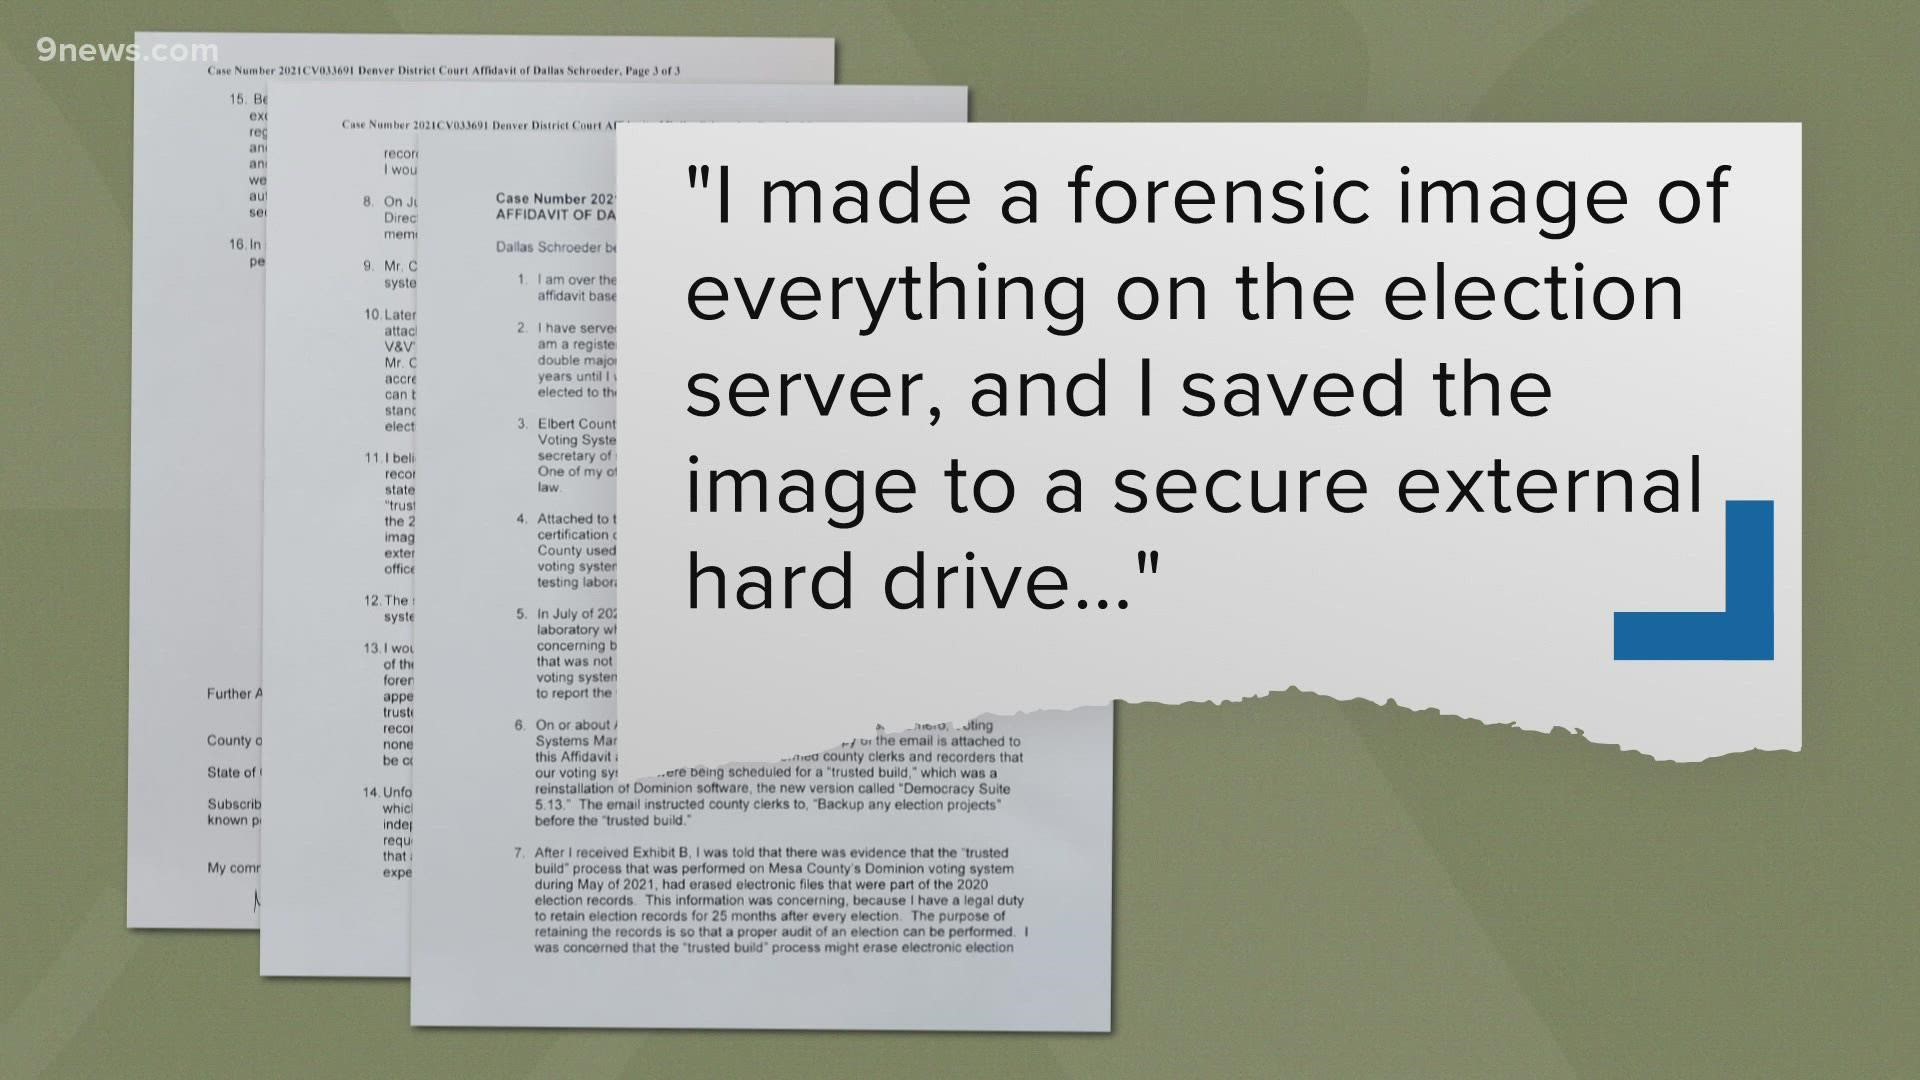 GOP Elbert County Clerk Dallas Schroeder wrote in an affidavit: "I made a forensic image of everything on the election service," and saved a copy.